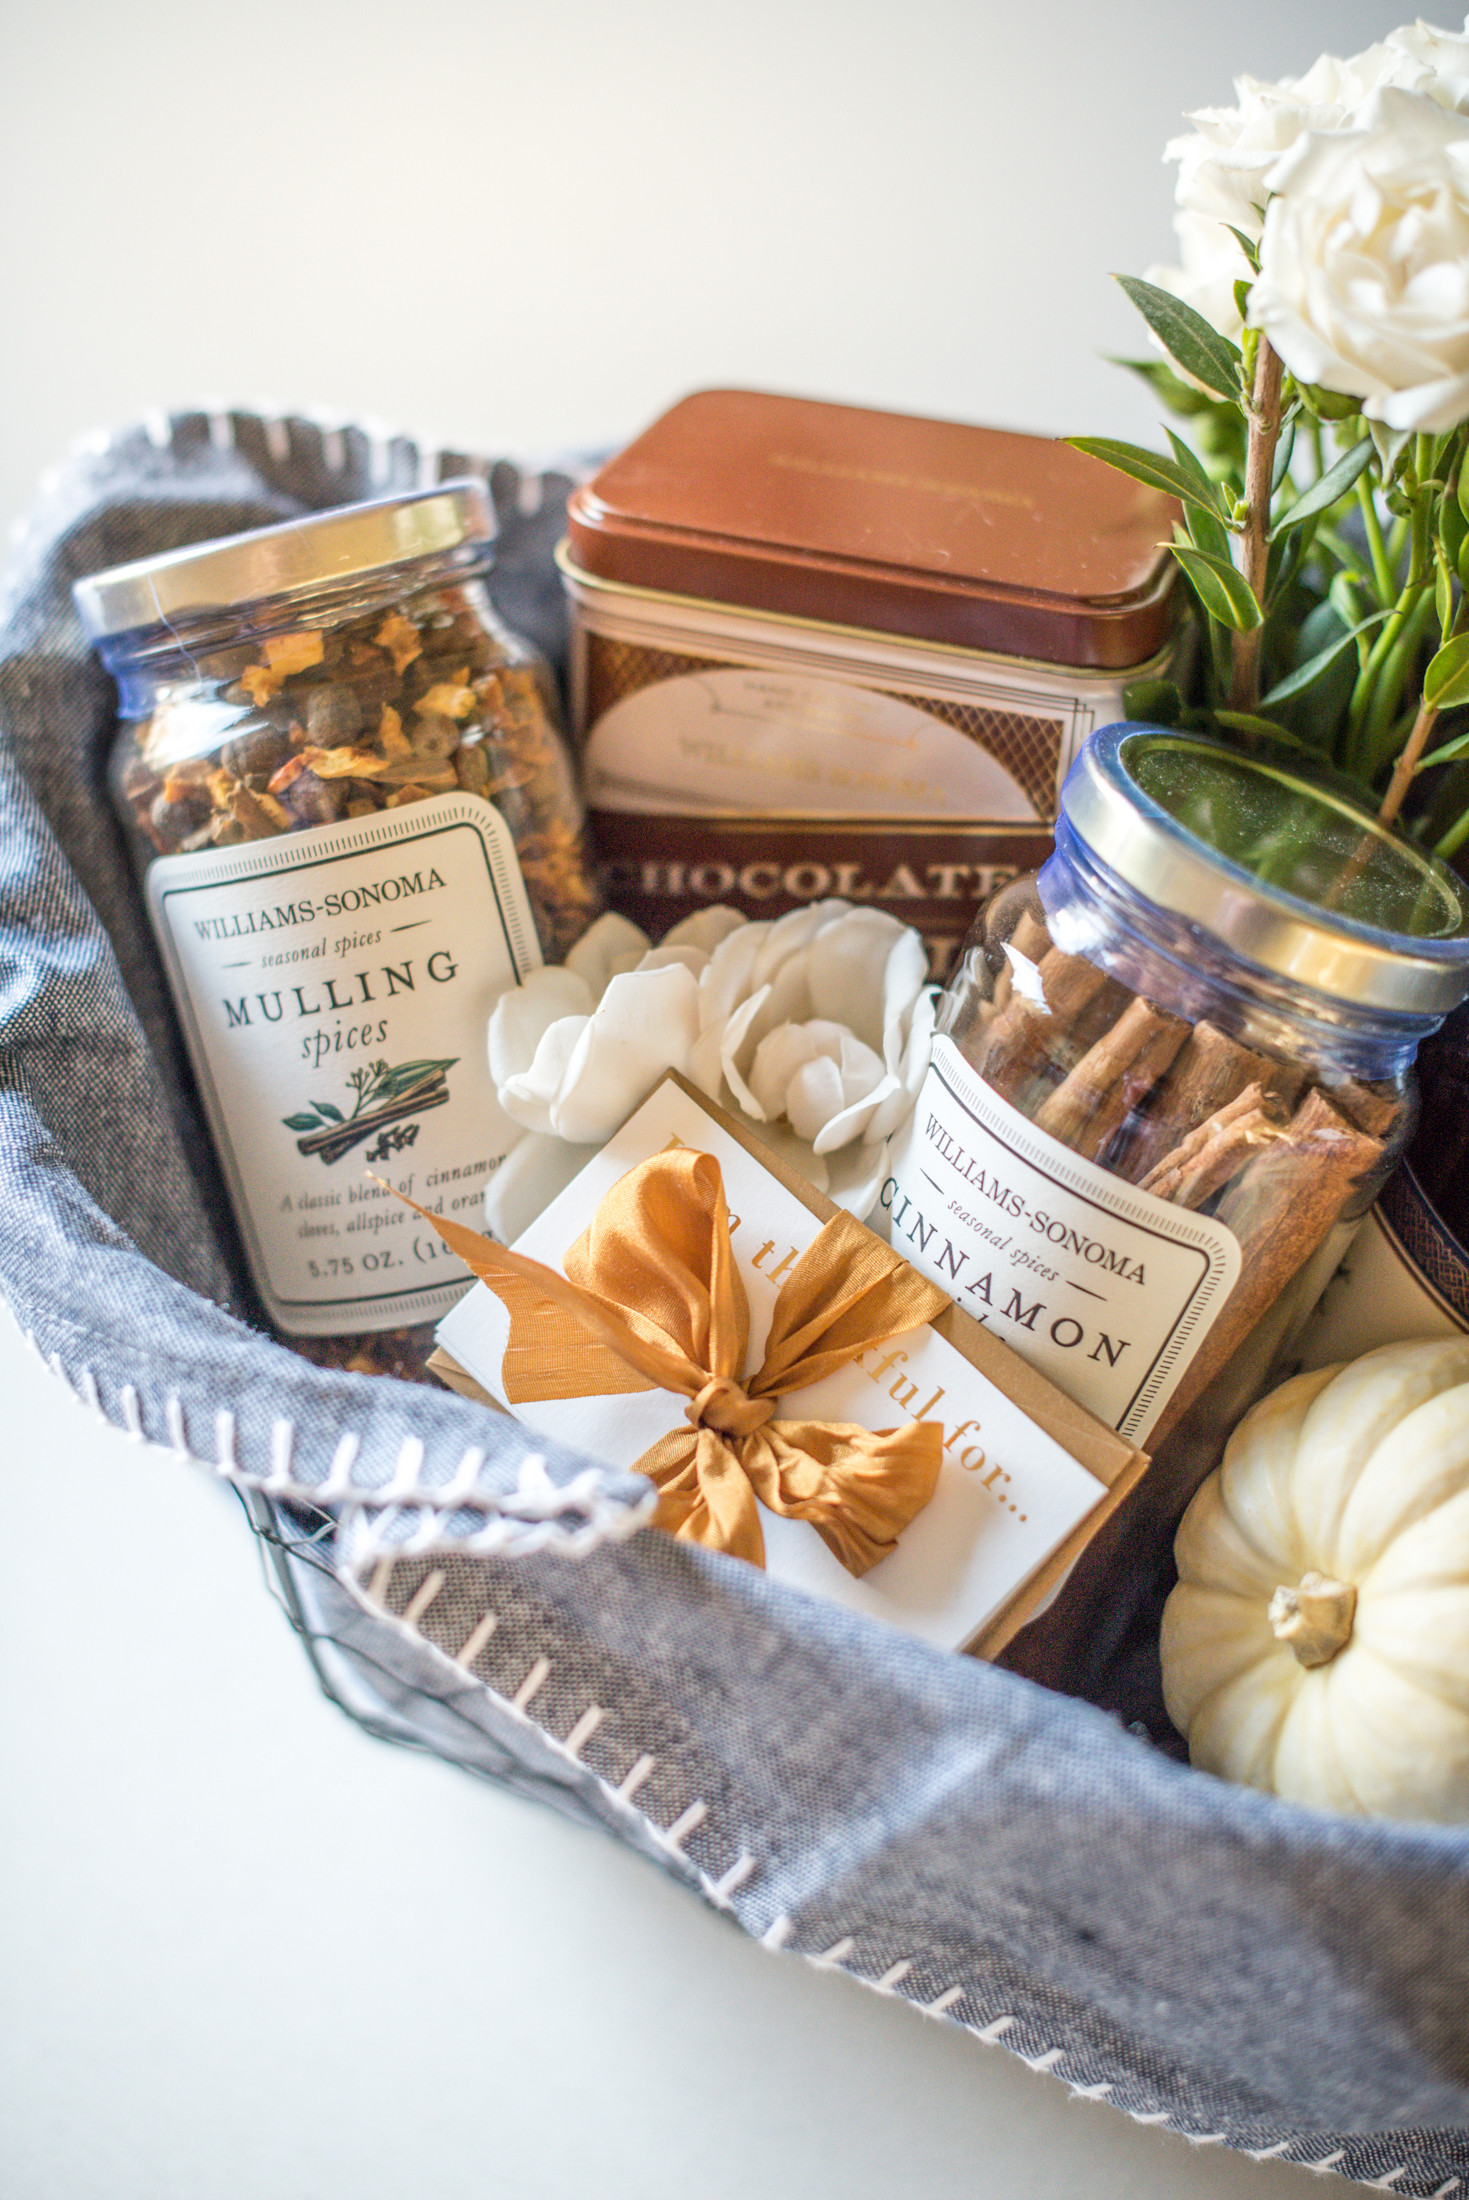 Gift Ideas For Thanksgiving Hostess
 The Every Hostess Thanksgiving Hostess Gift The Every